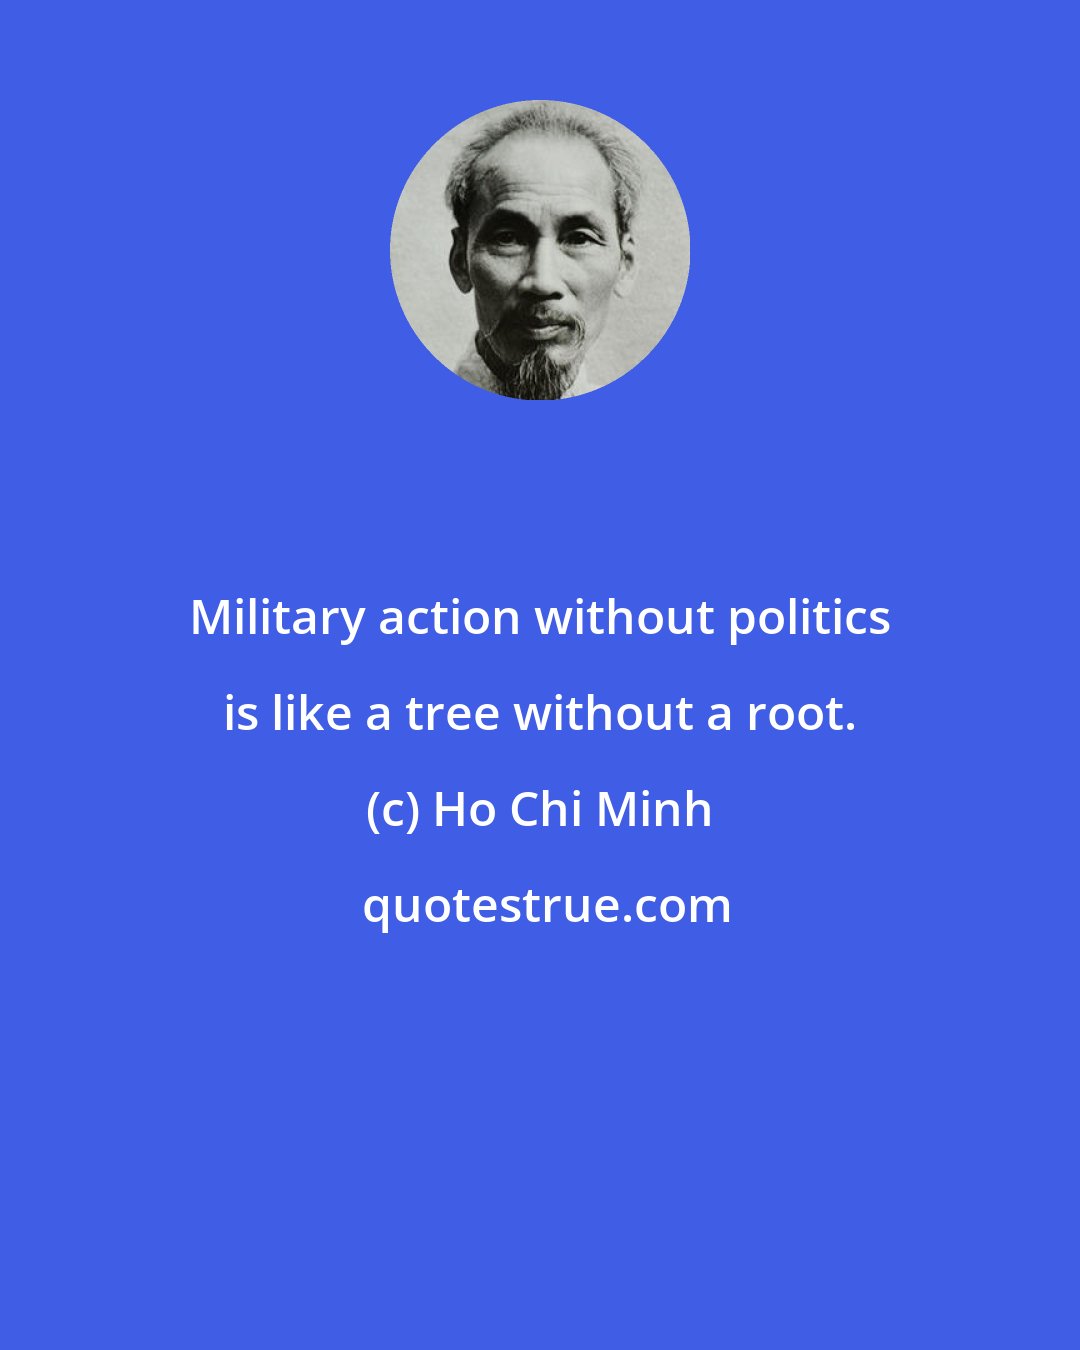 Ho Chi Minh: Military action without politics is like a tree without a root.